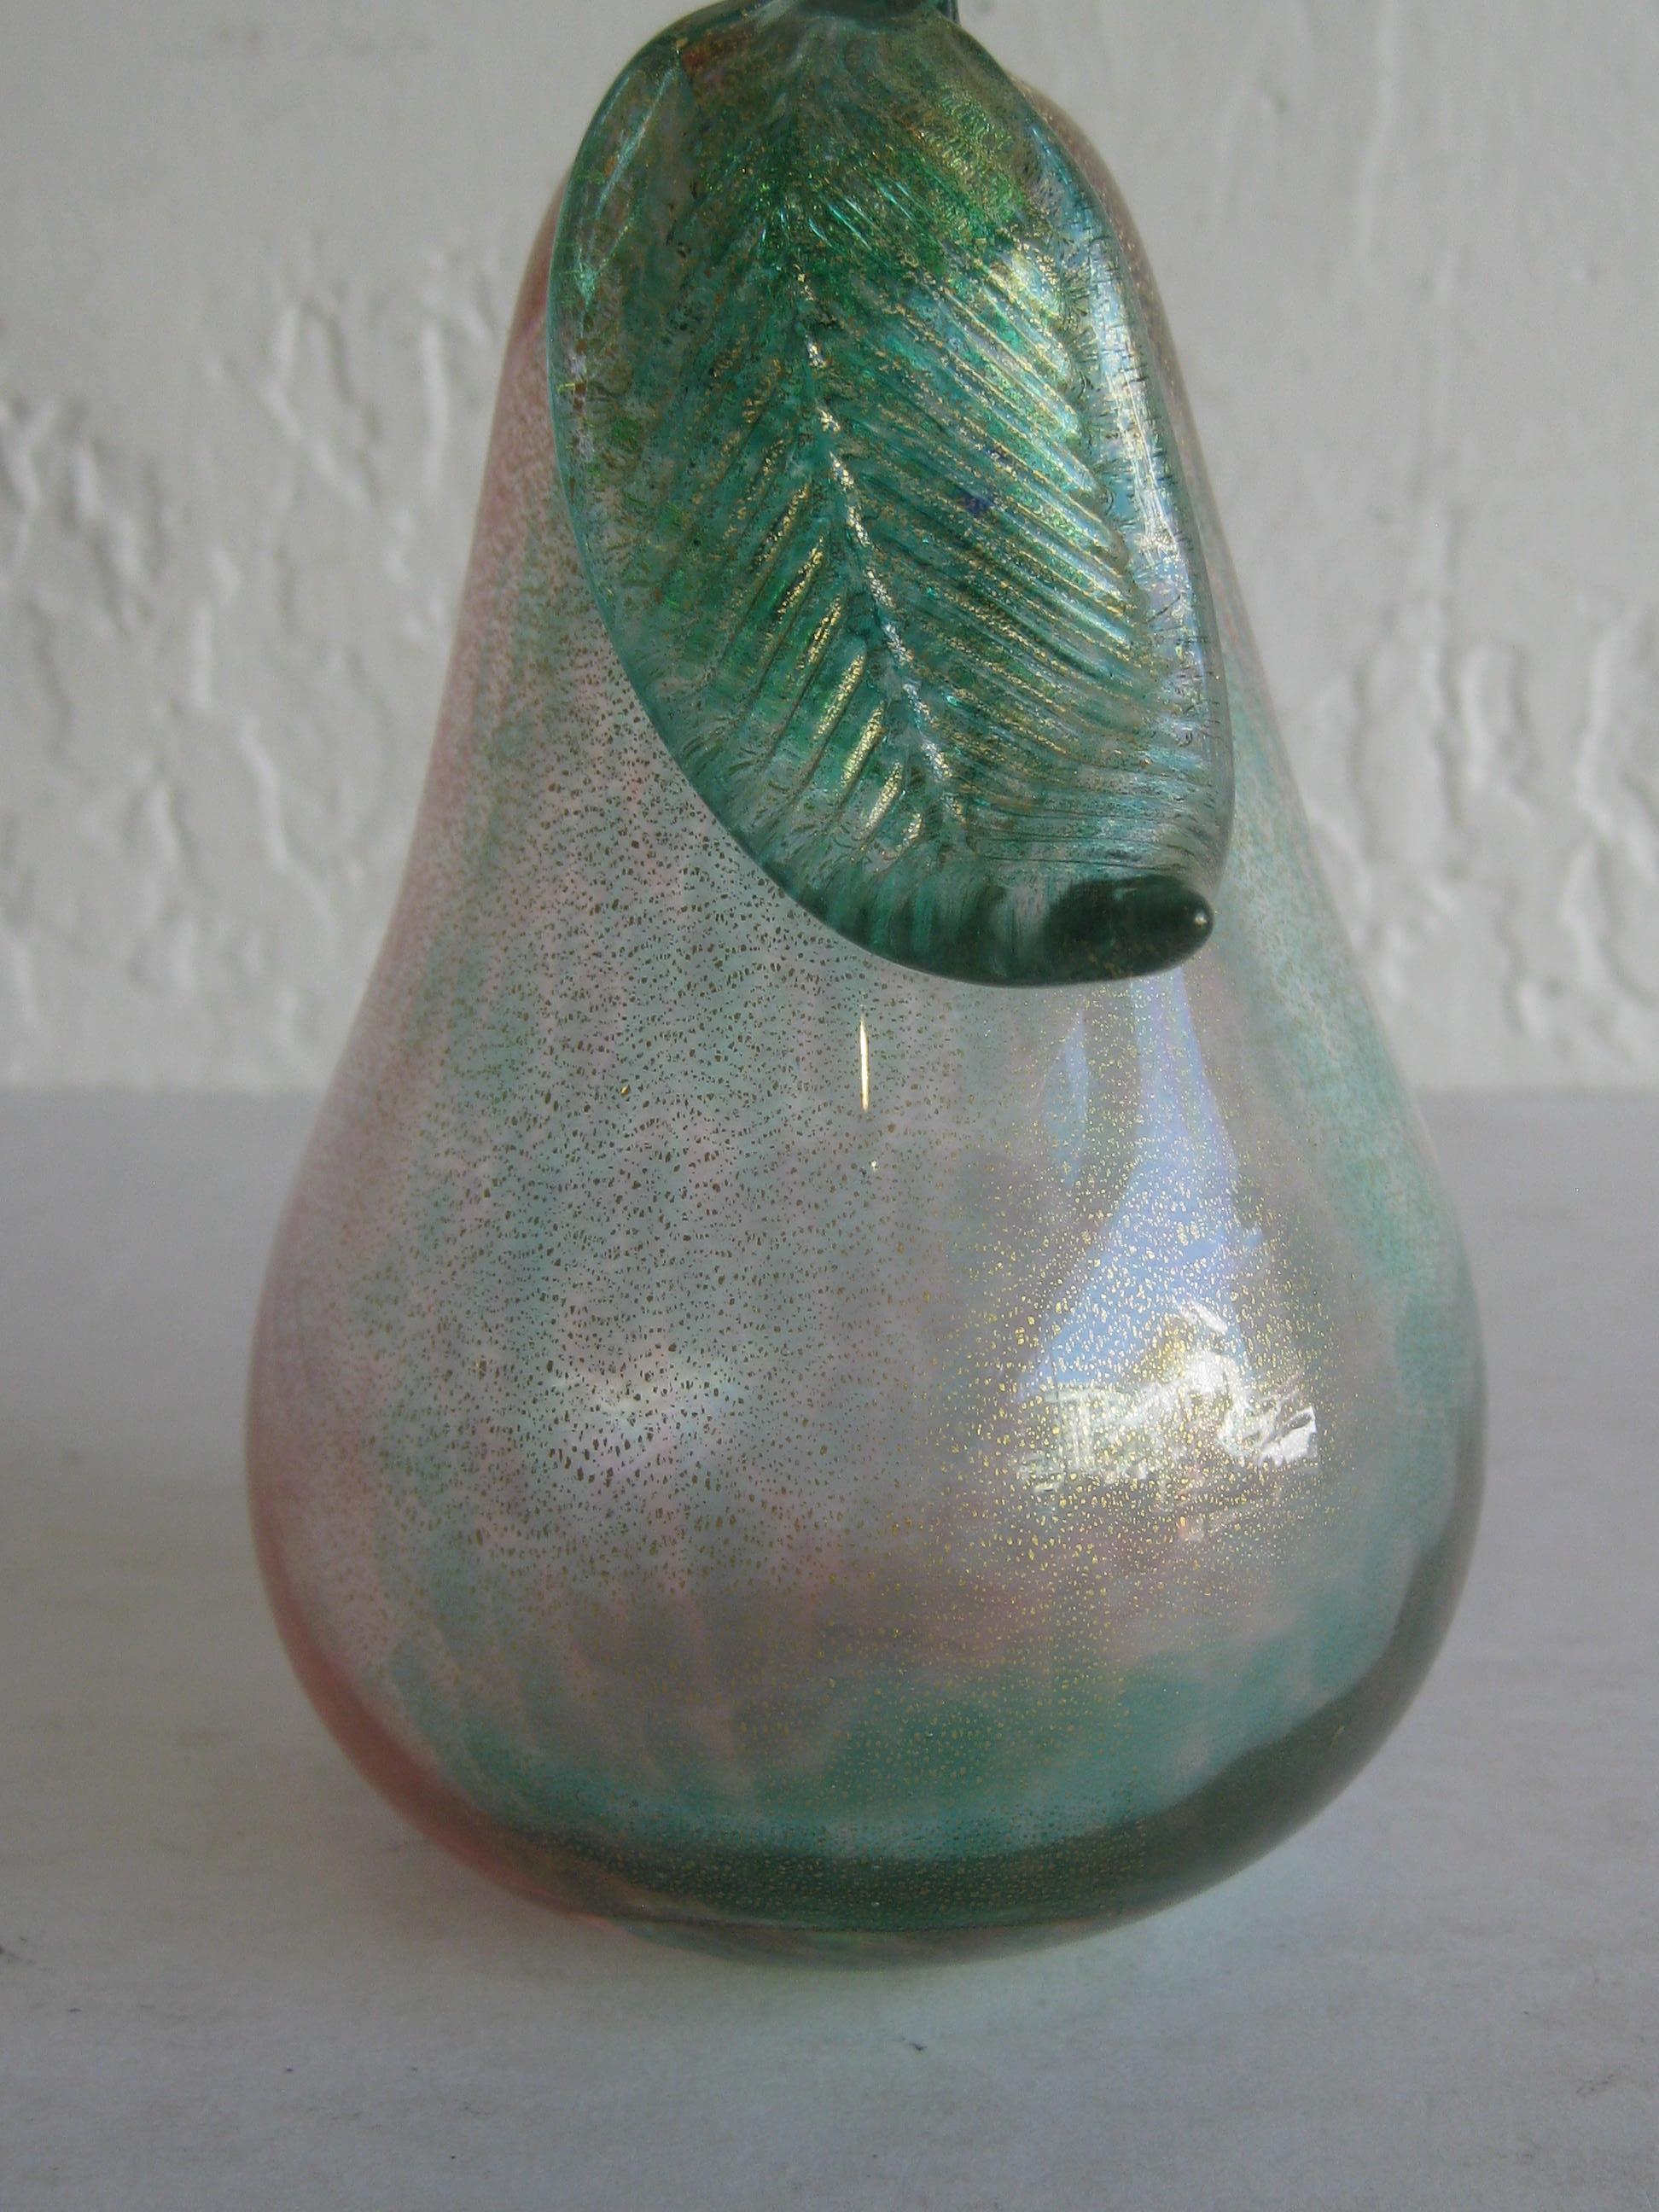 Exquisite Venetian Murano art glass pink and green hand blown figural pear by Alfredo Barbini. Great form and color. Has gold fleck throughout the pear. In excellent condition with no issues. Measures approx. 5 3/4